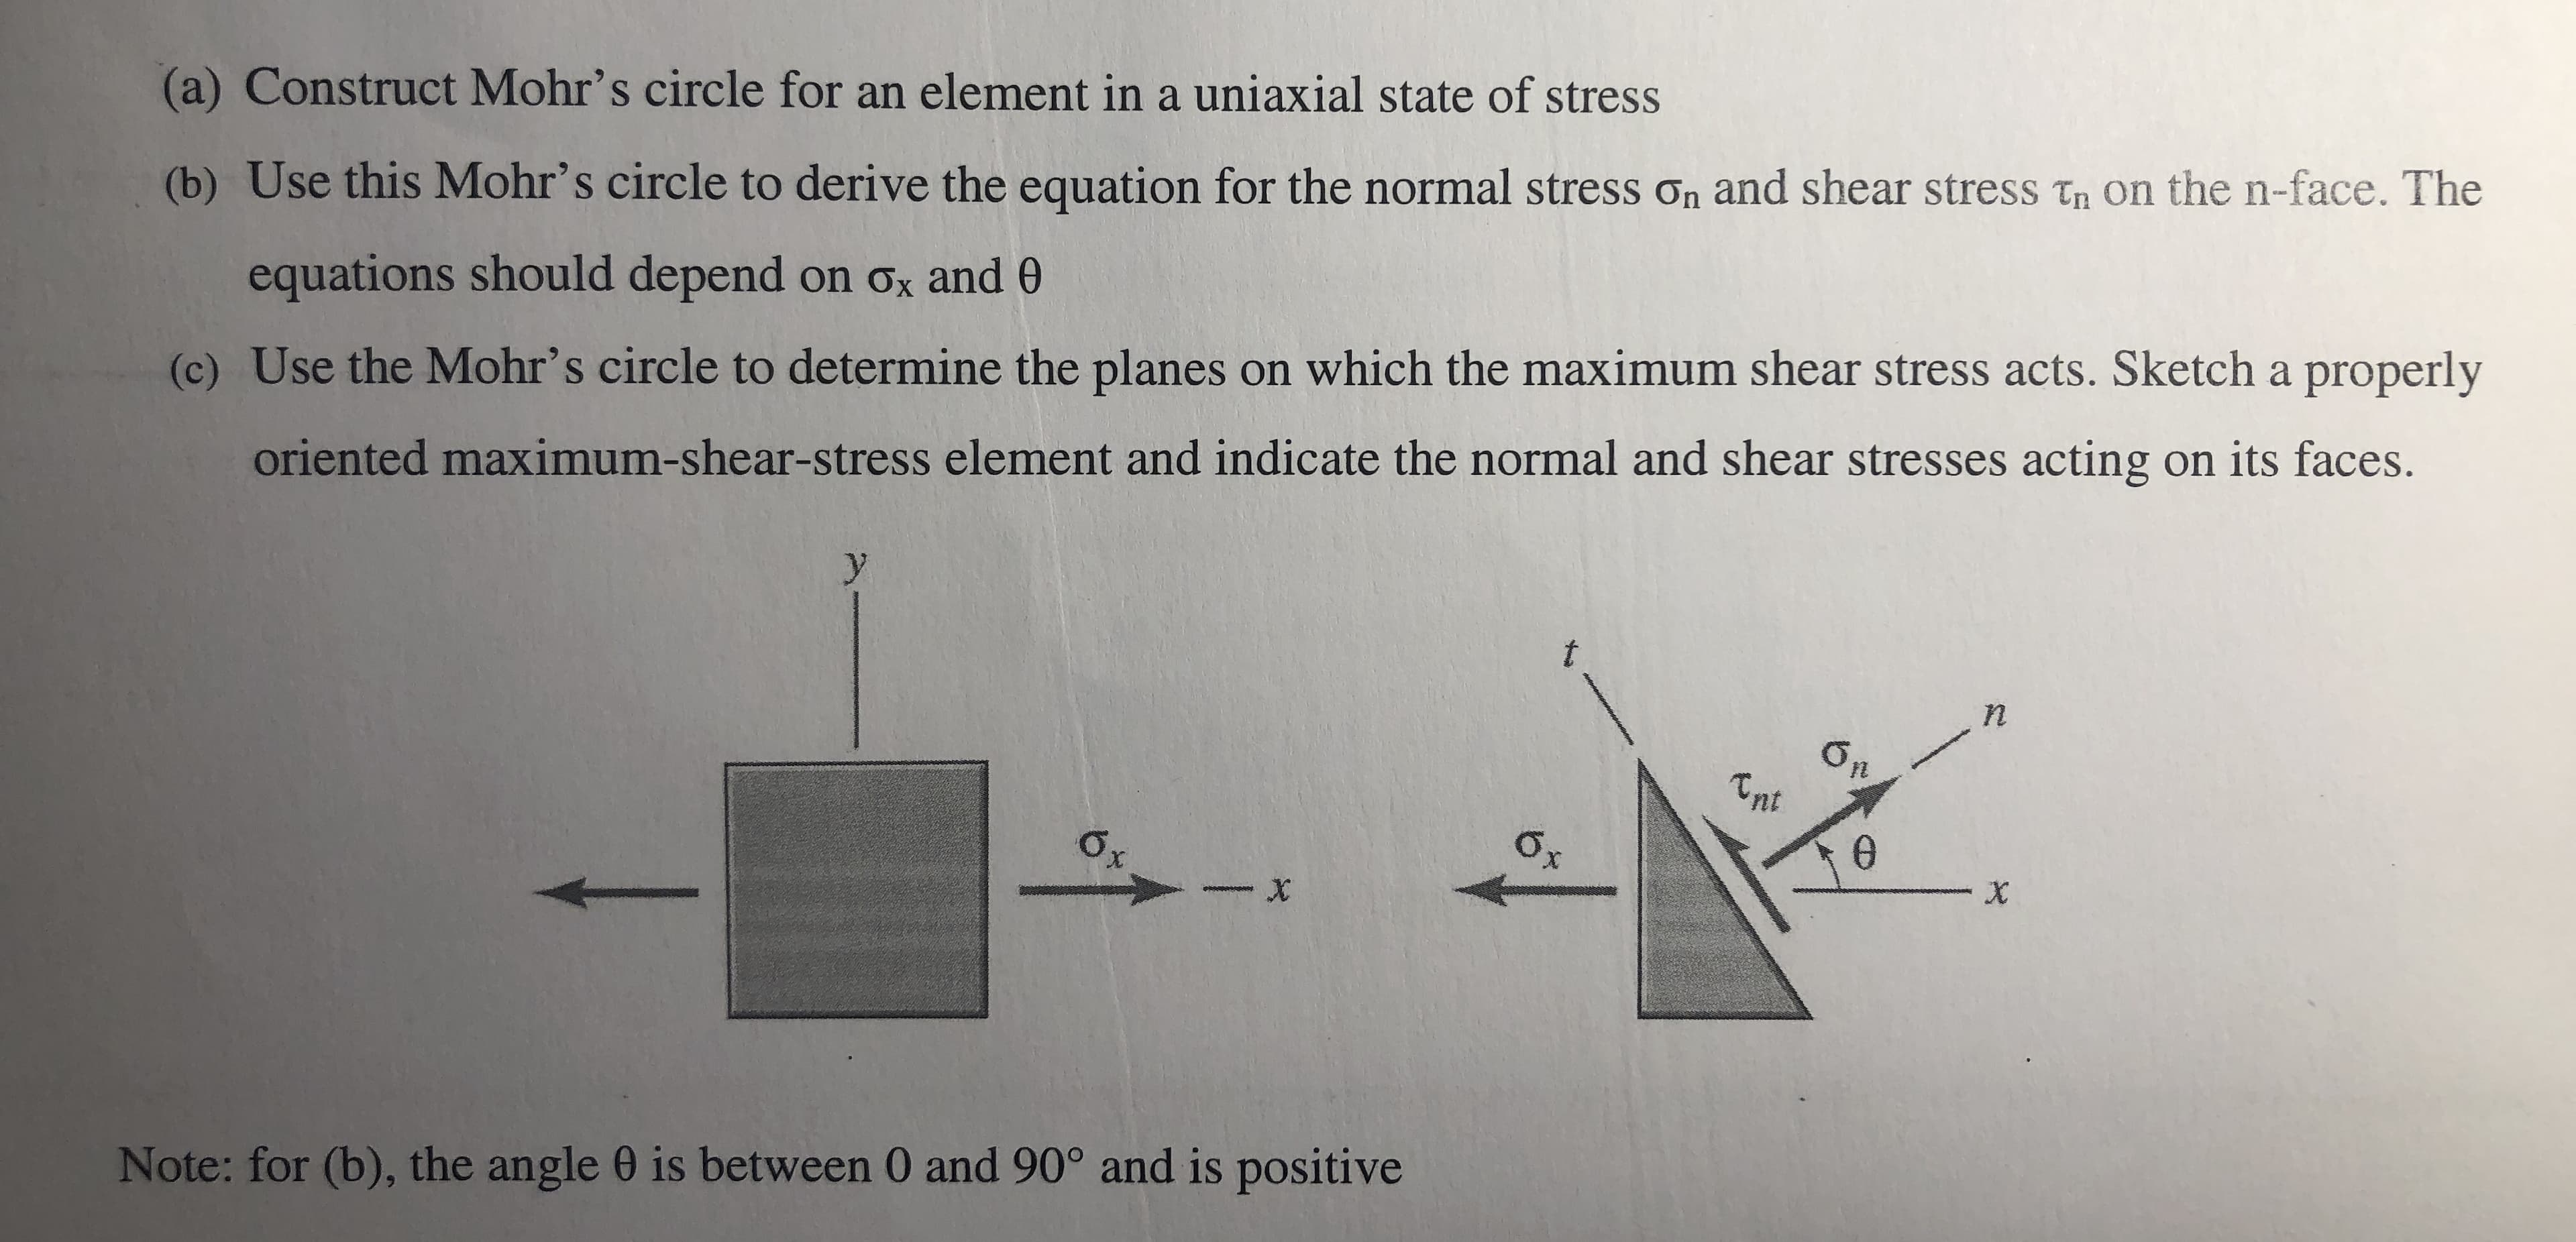 (a) Construct Mohr's circle for an element in a uniaxial state of stress
(b) Use this Mohr's circle to derive the equation for the normal stress On and shear stress En on the n-face. The
equations should depend on Ox and θ
(c) Use the Mohr's circle to determine the planes on which the maximum shear stress acts. Sketch a properly
oriented maximum-shear-stress element and indicate the normal and shear stresses acting on its faces.
Ơn
nt
o,
Note: for (b), the angle θ is between 0 and 90° and is positive
